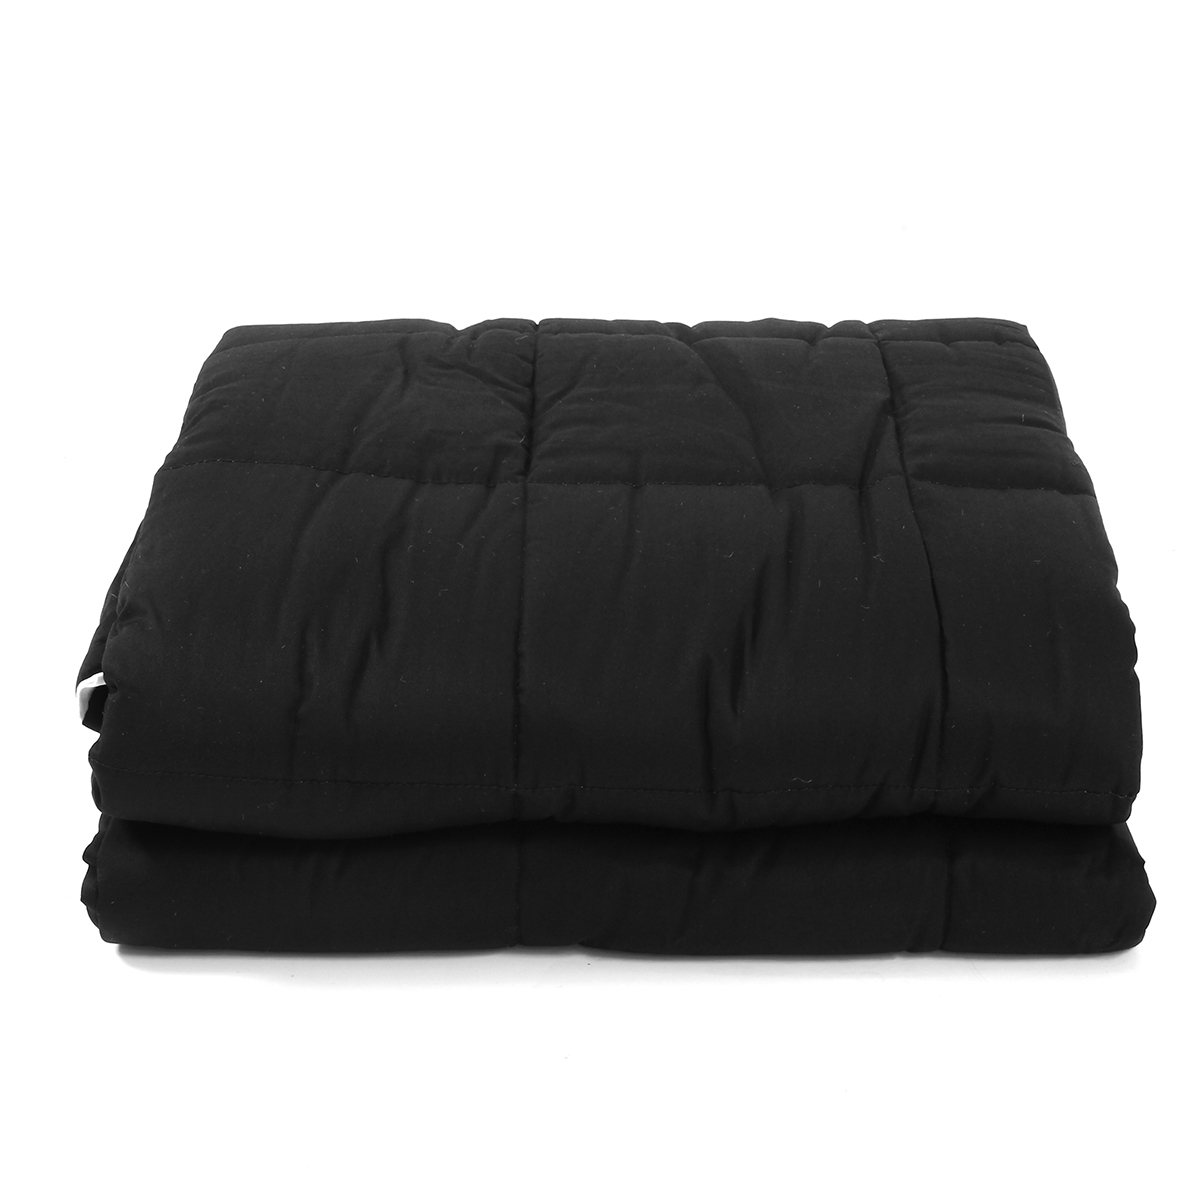 120x180CM-Black-Grey-Weighted-Blanket-Cotton-79115kg-Heavy-Sensory-Relax-Blankets-1349466-3